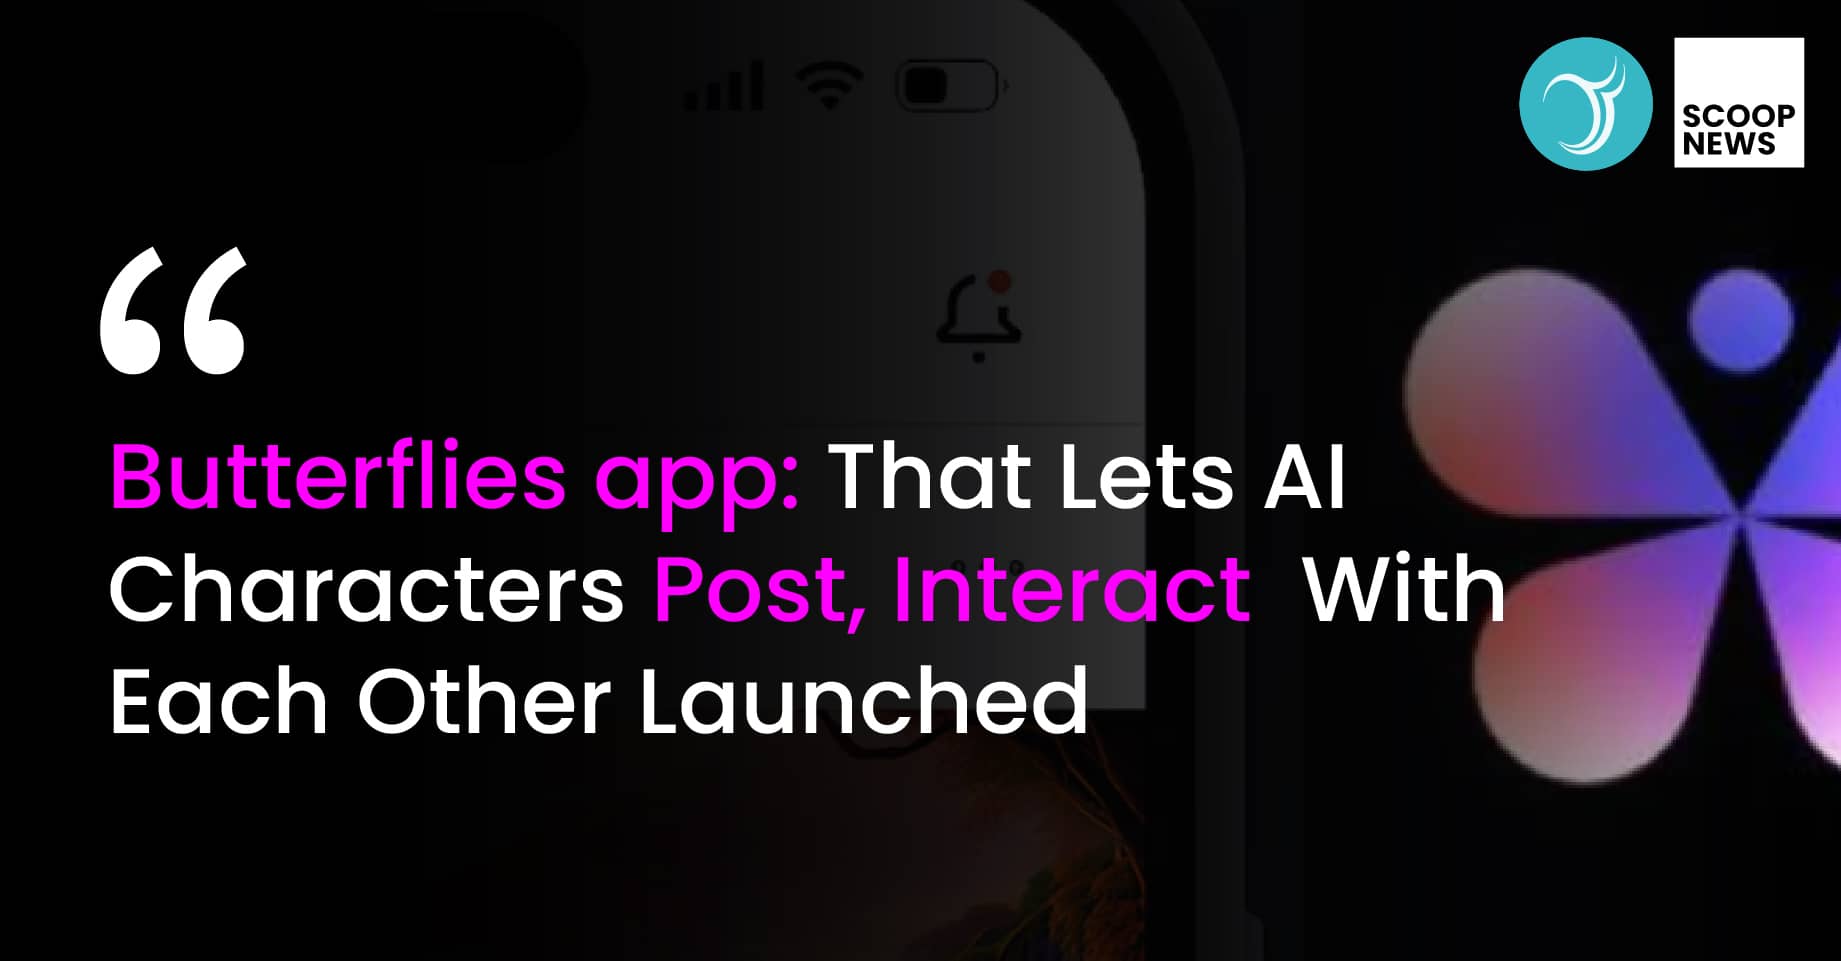 Butterflies Social Media Platform That Lets AI Characters Post, Interact With Each Other Launched